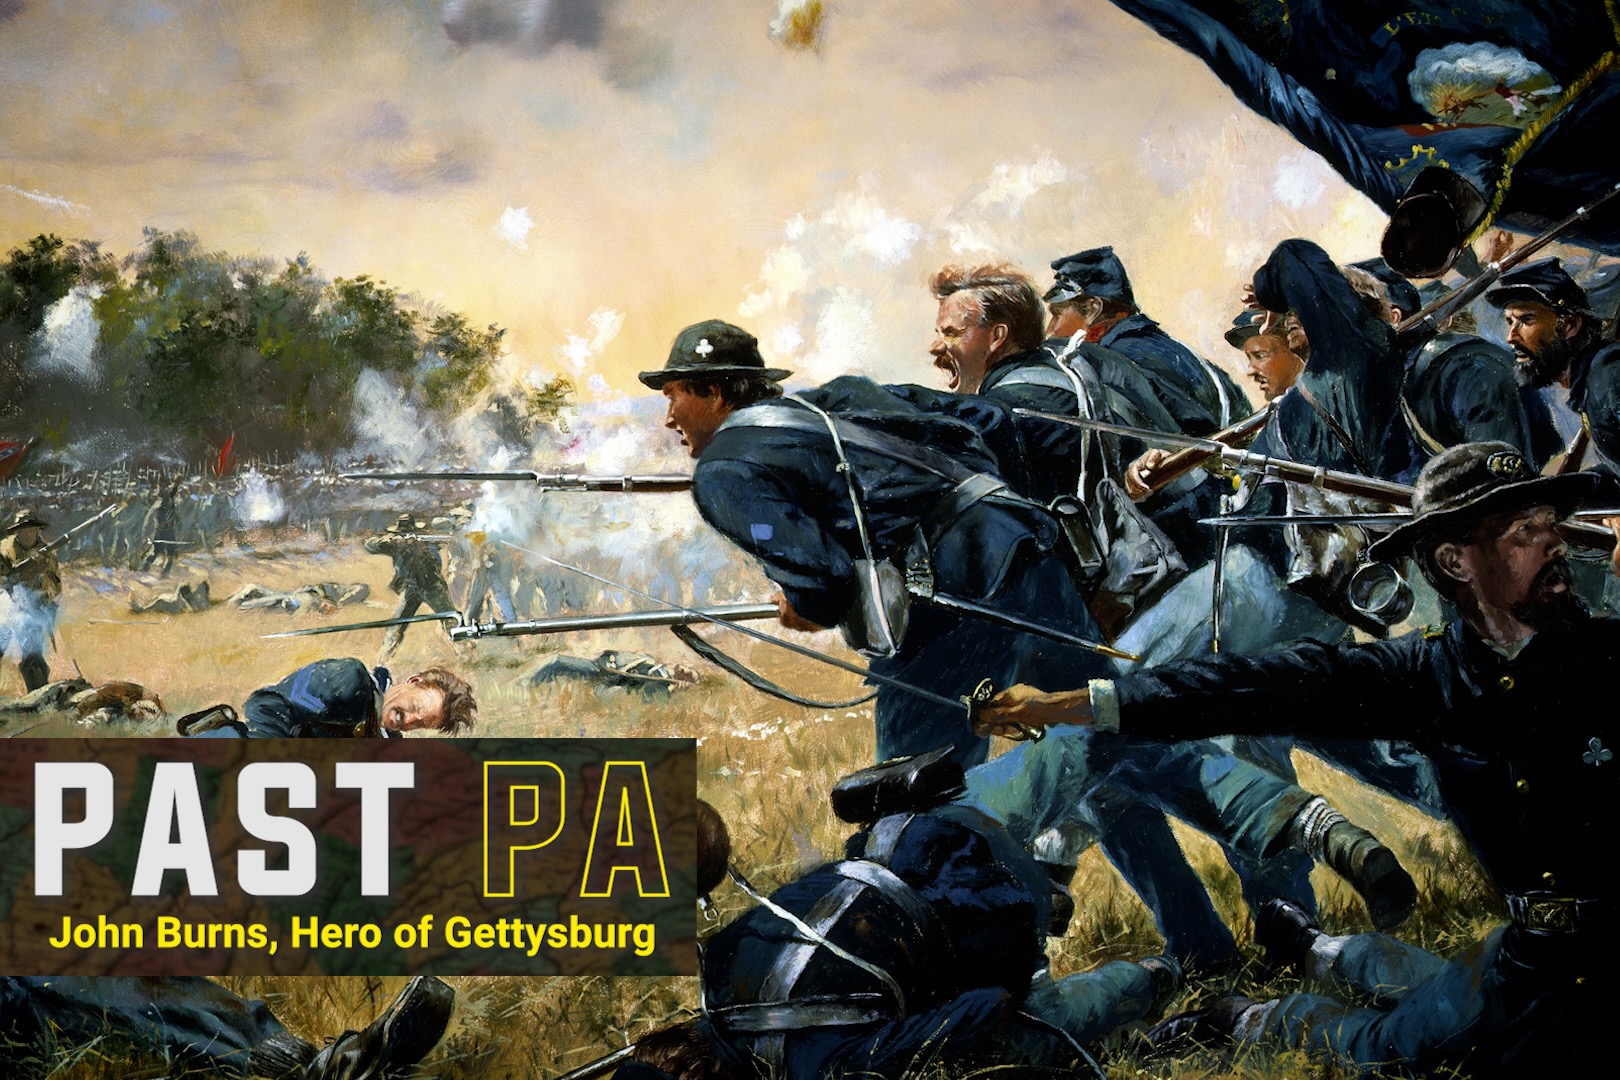 A painting of Union troops fighting during the Civil War.